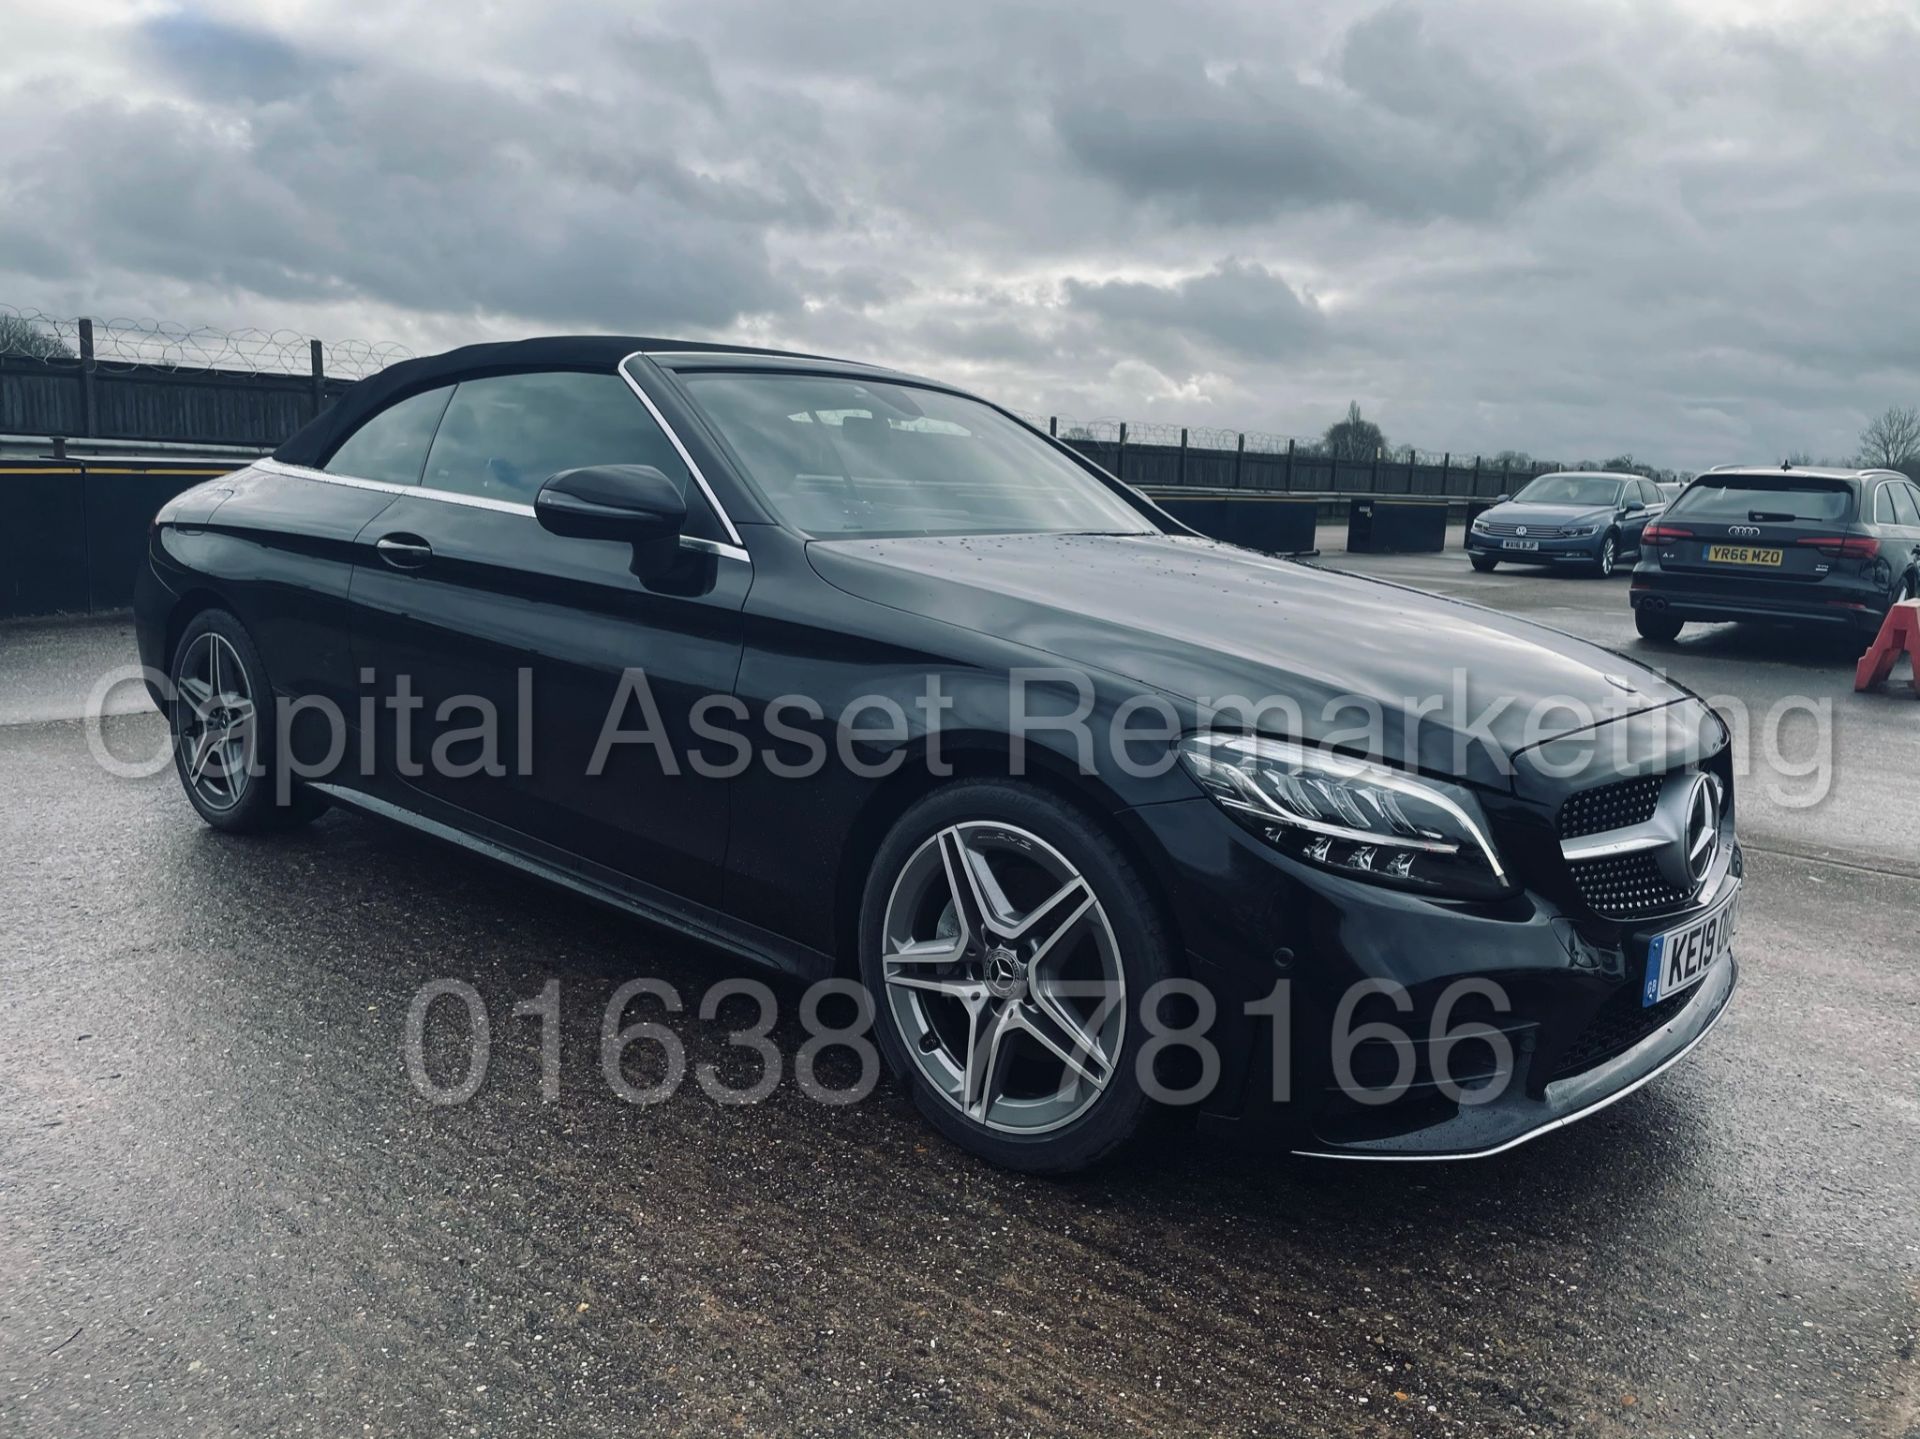 (ON SALE) MERCEDES-BENZ C220D *AMG LINE - CABRIOLET* (2019) '9G TRONIC AUTO - LEATHER - SAT NAV' - Image 23 of 56